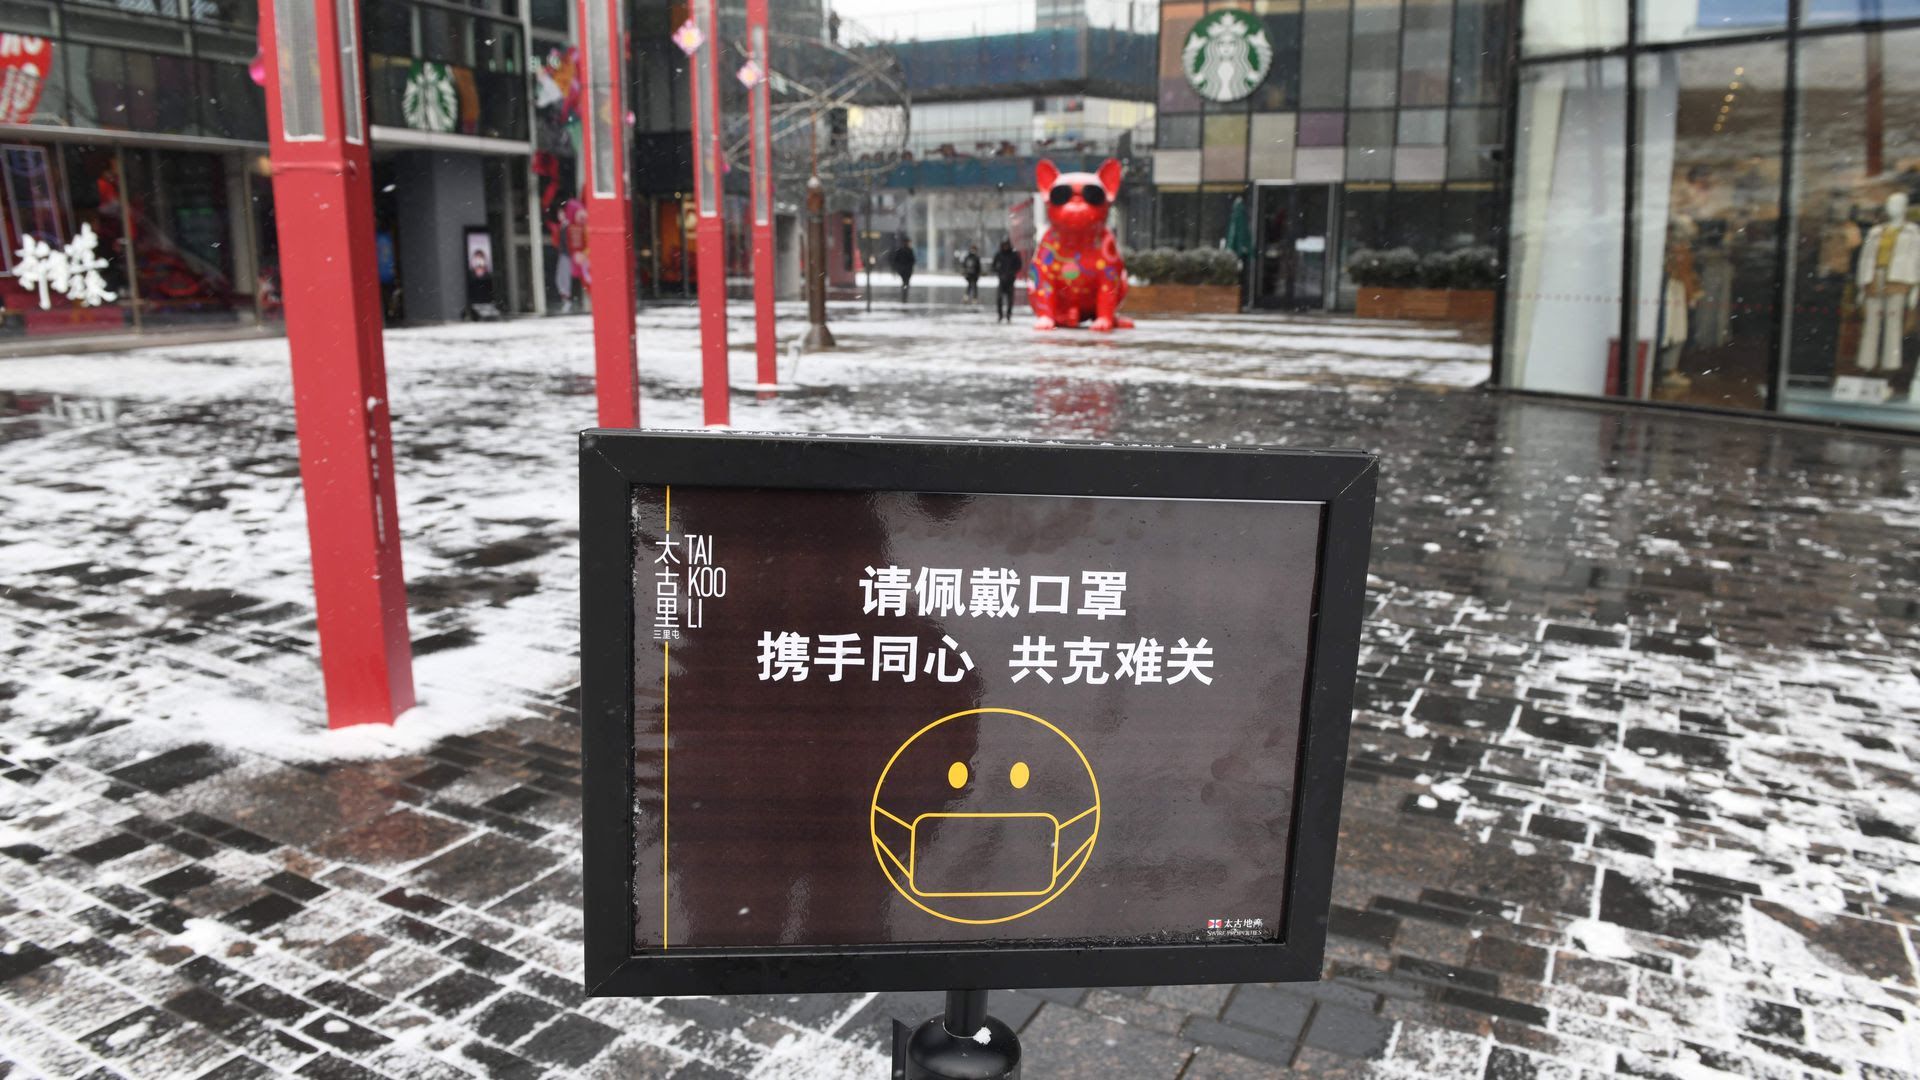 A sign urges visitors to wear face masks at the entrance to an empty shopping mall in Beijing